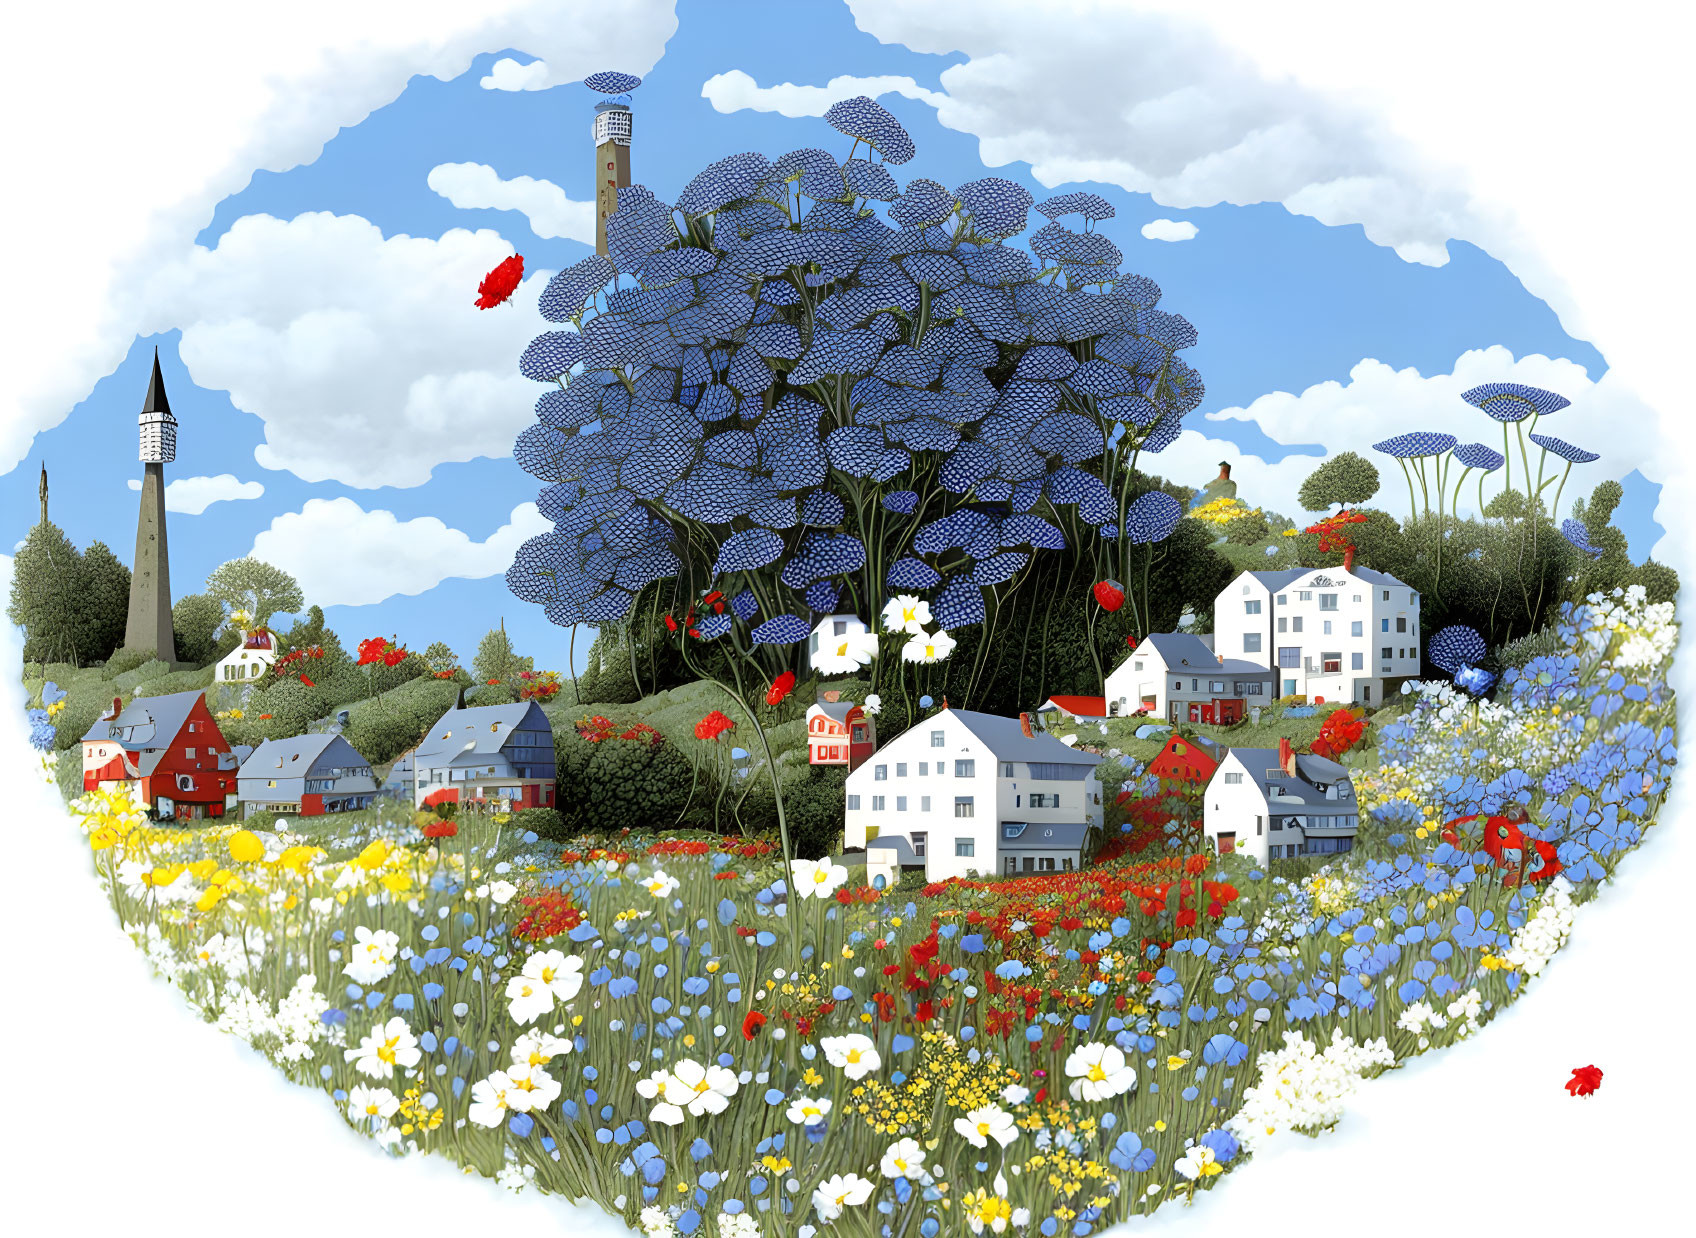 Whimsical village illustration with oversized blue flowers, traditional houses, and lighthouse